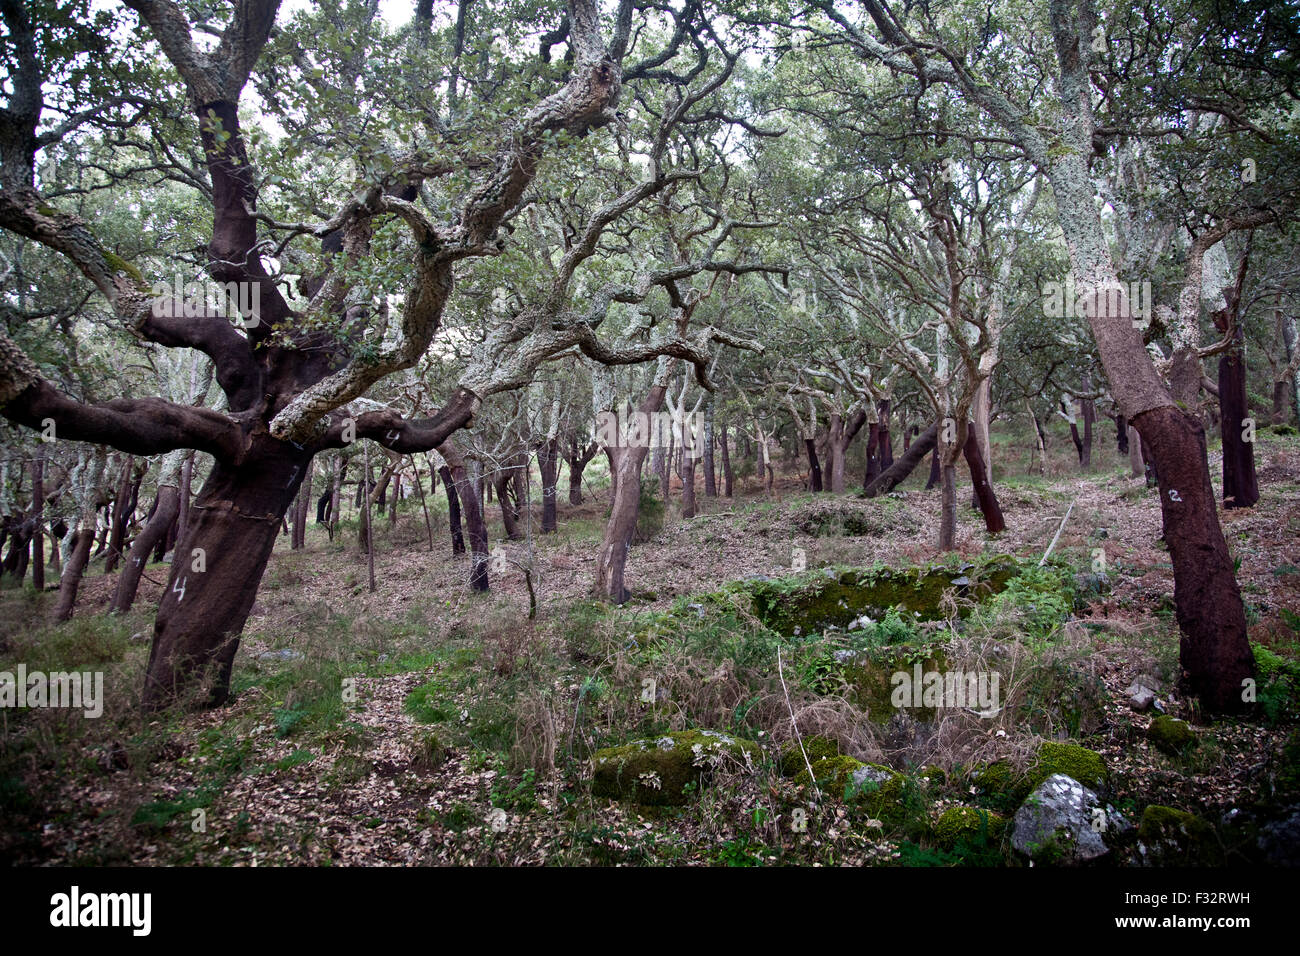 Forest of harvested cork trees in Algarve, Portugal. Stock Photo